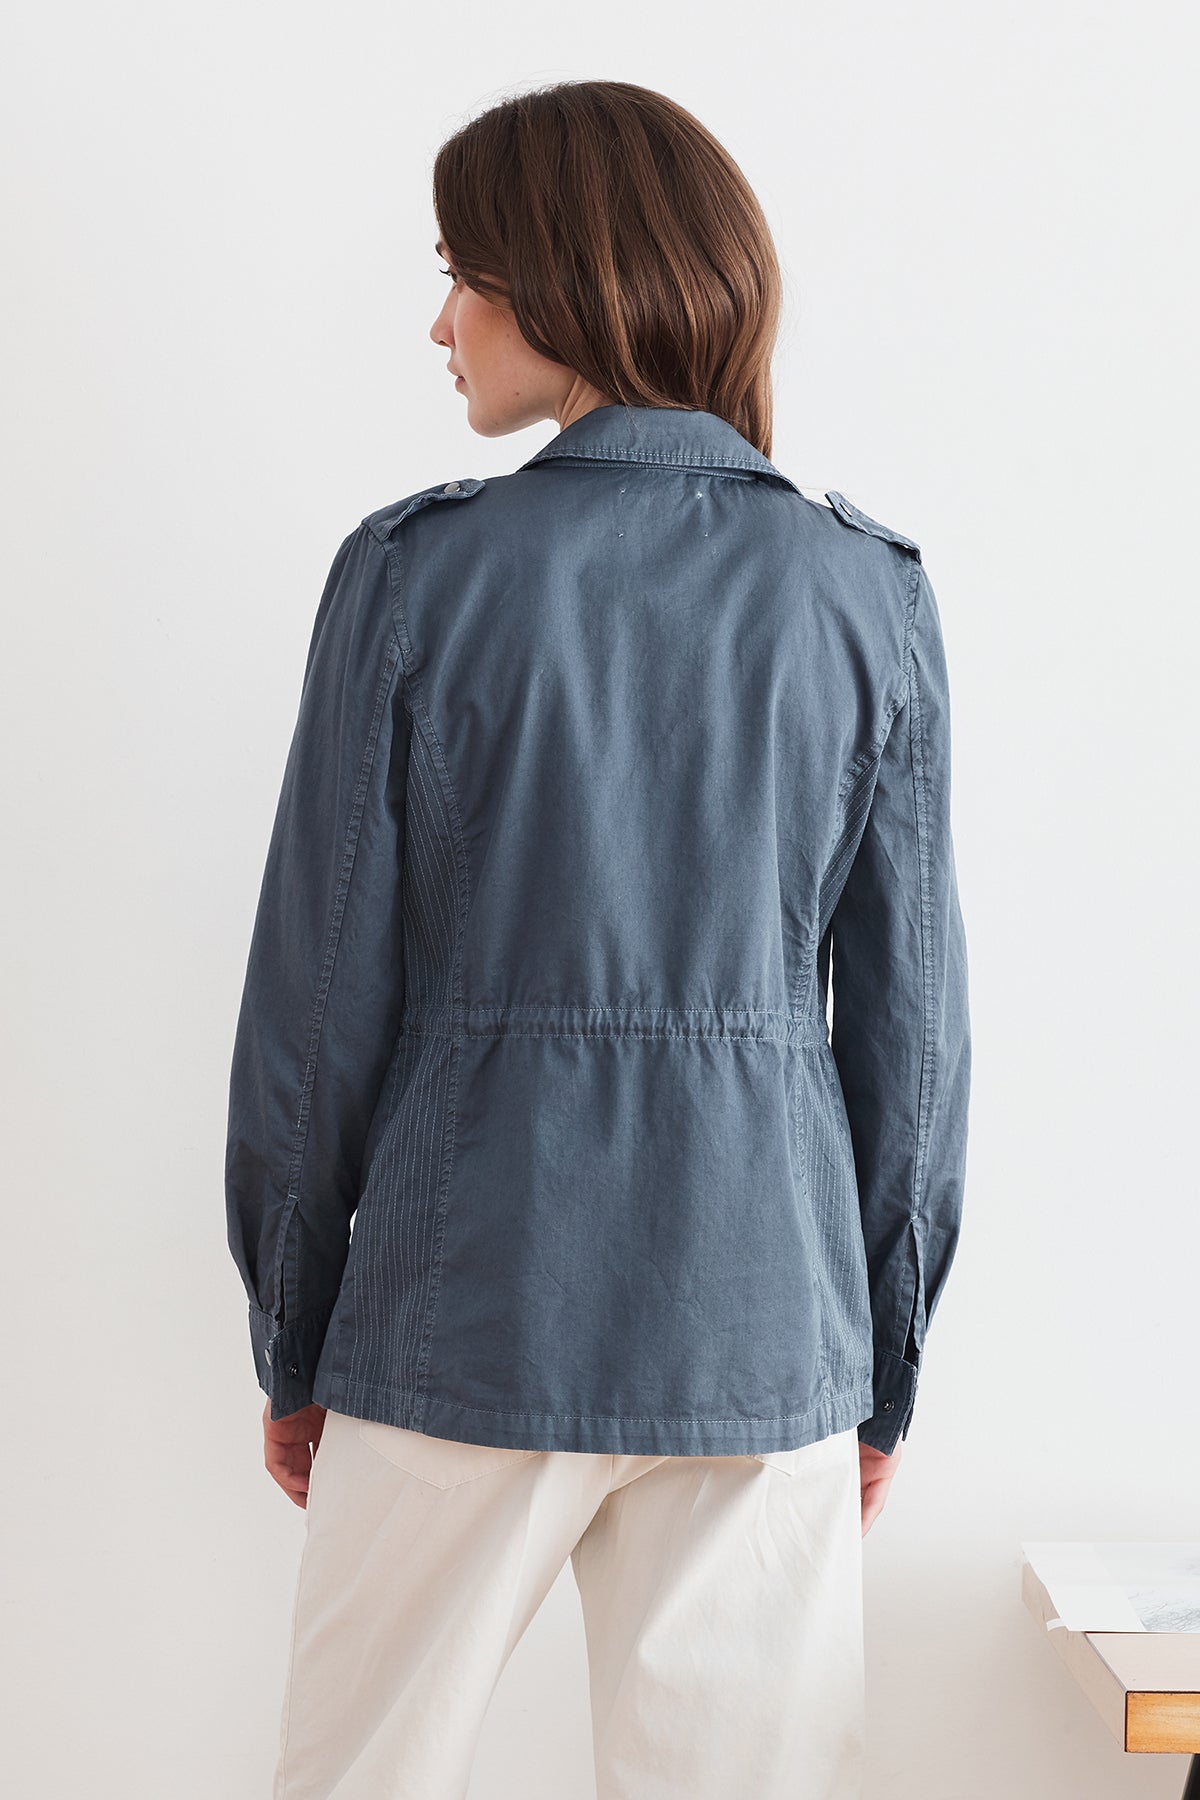 The back view of a woman wearing the Velvet by Graham & Spencer RUBY LIGHT-WEIGHT ARMY JACKET.-7237763760209